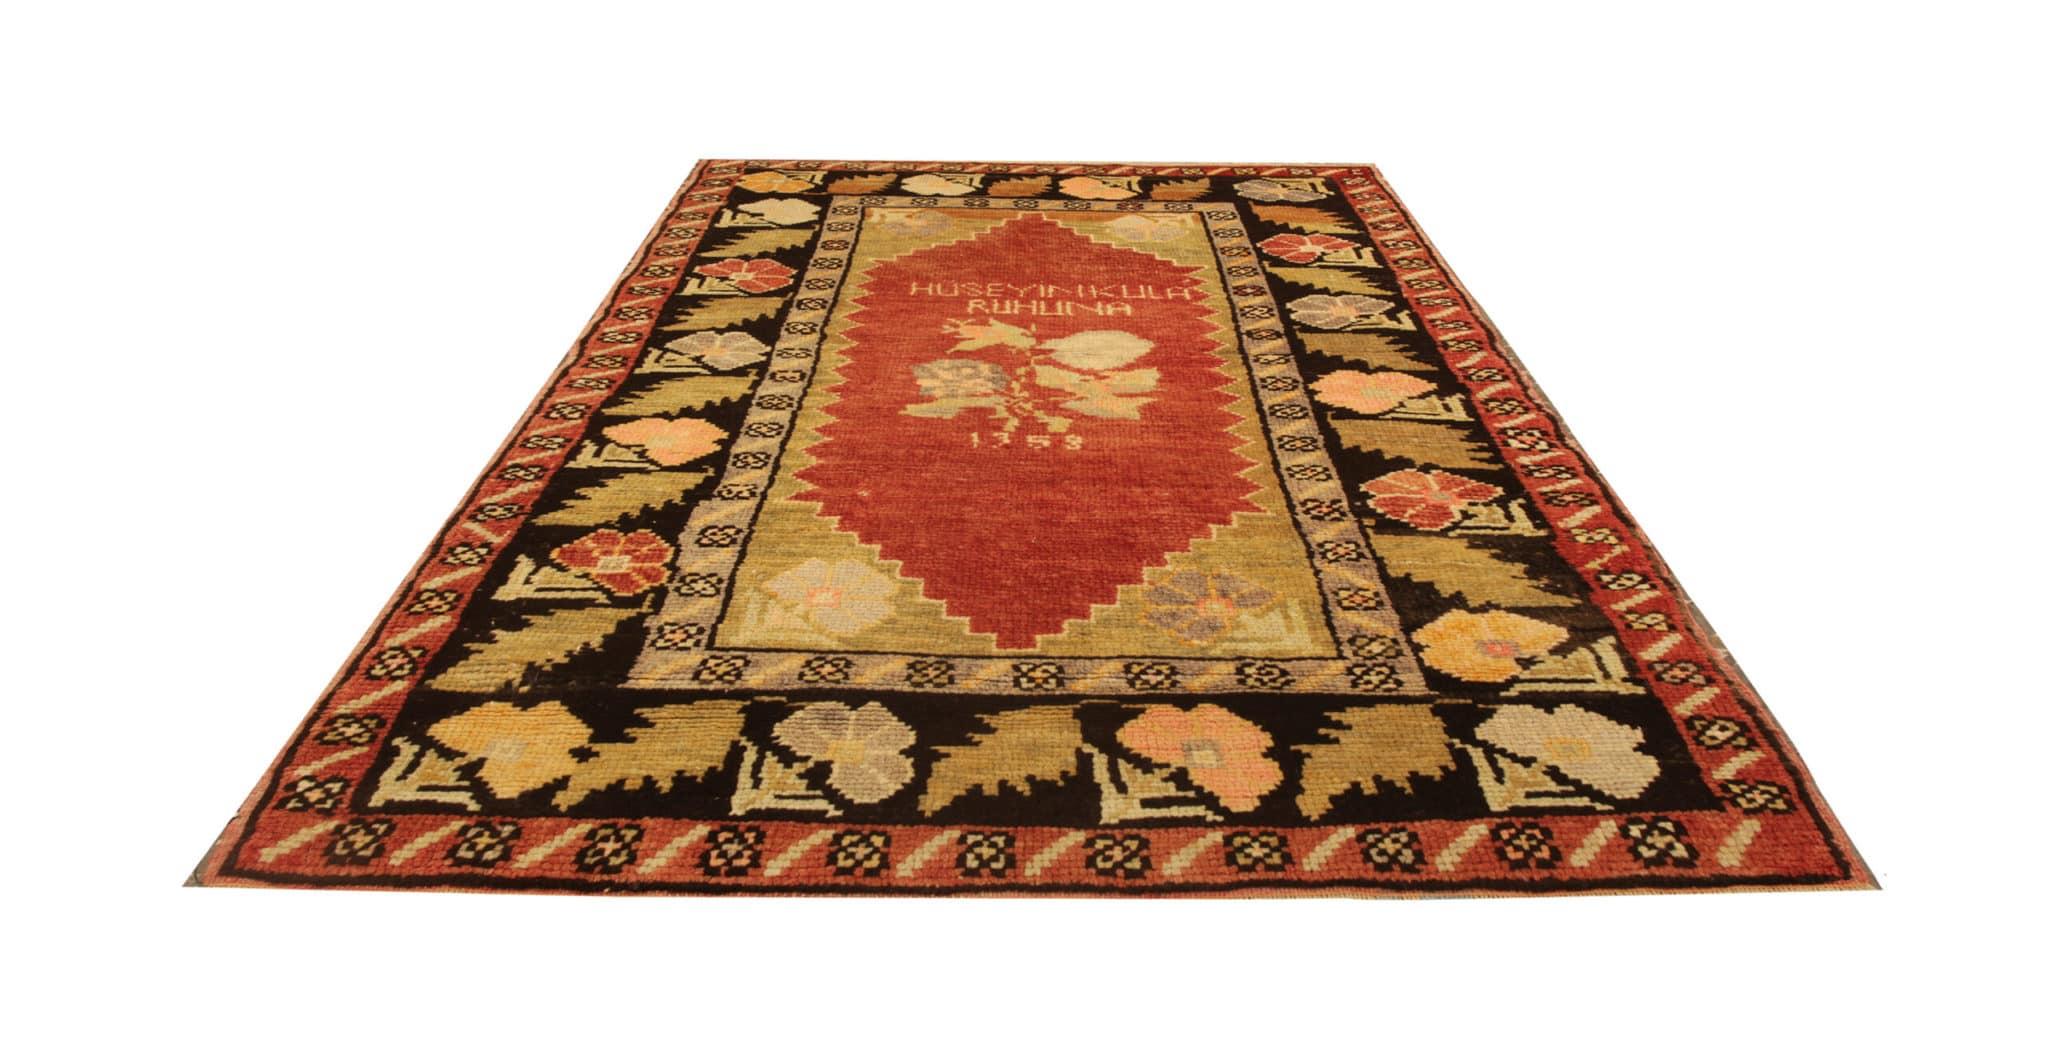 Cotton Antique Rugs Yellow Turkish Rug Handmade Carpet, Oriental Rug Living Room Rugs For Sale